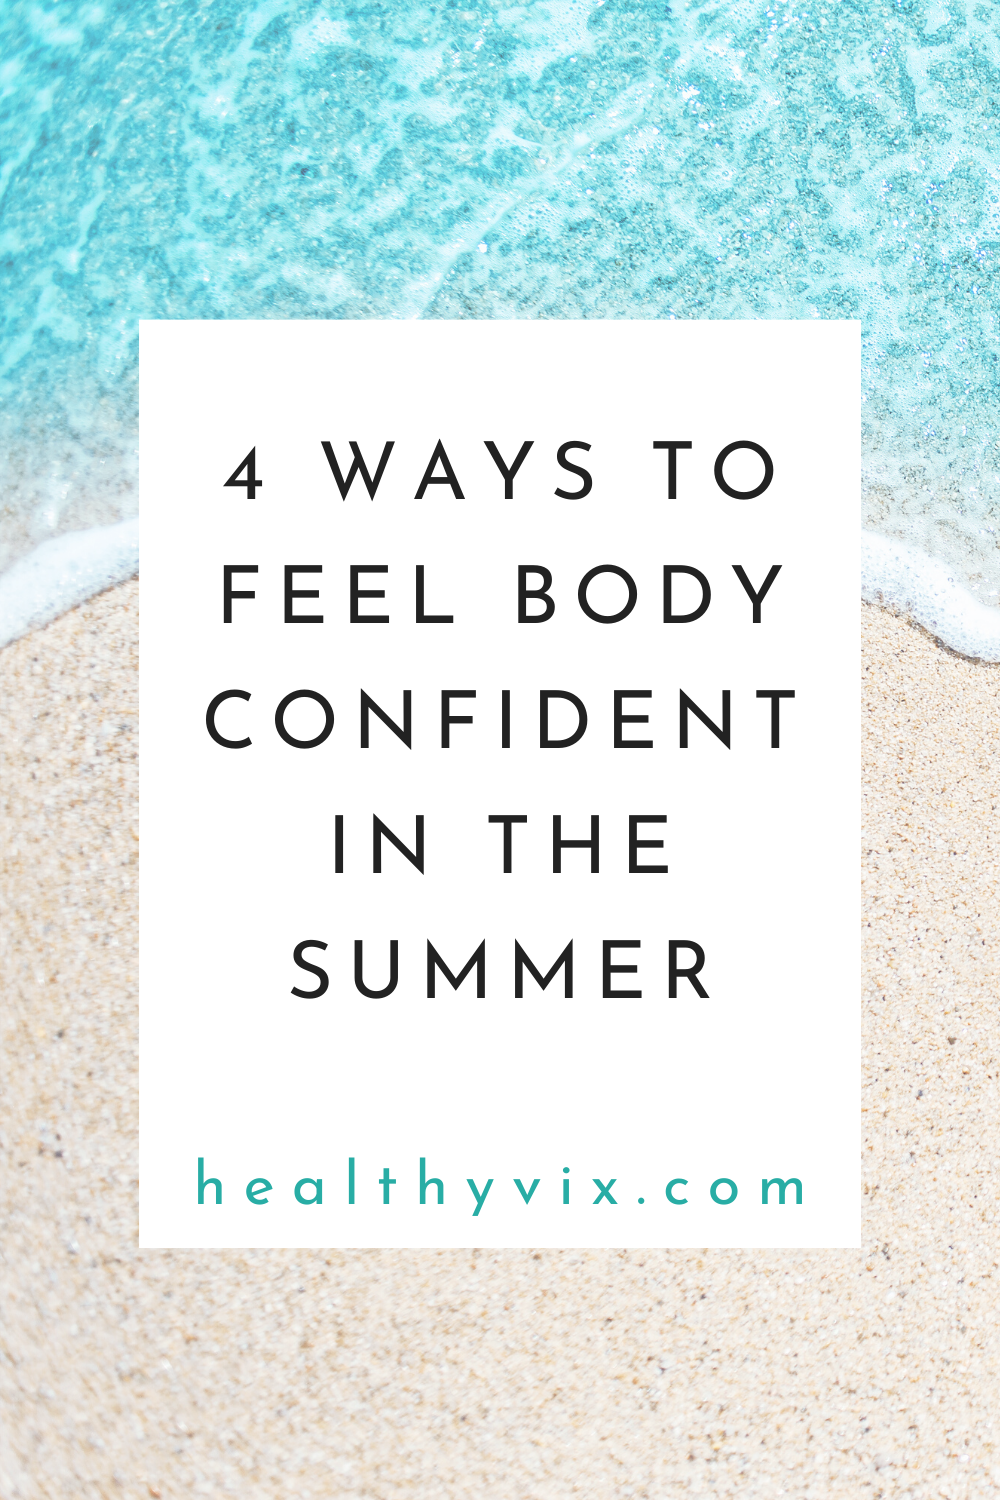 4 ways to feel body confident in the summer